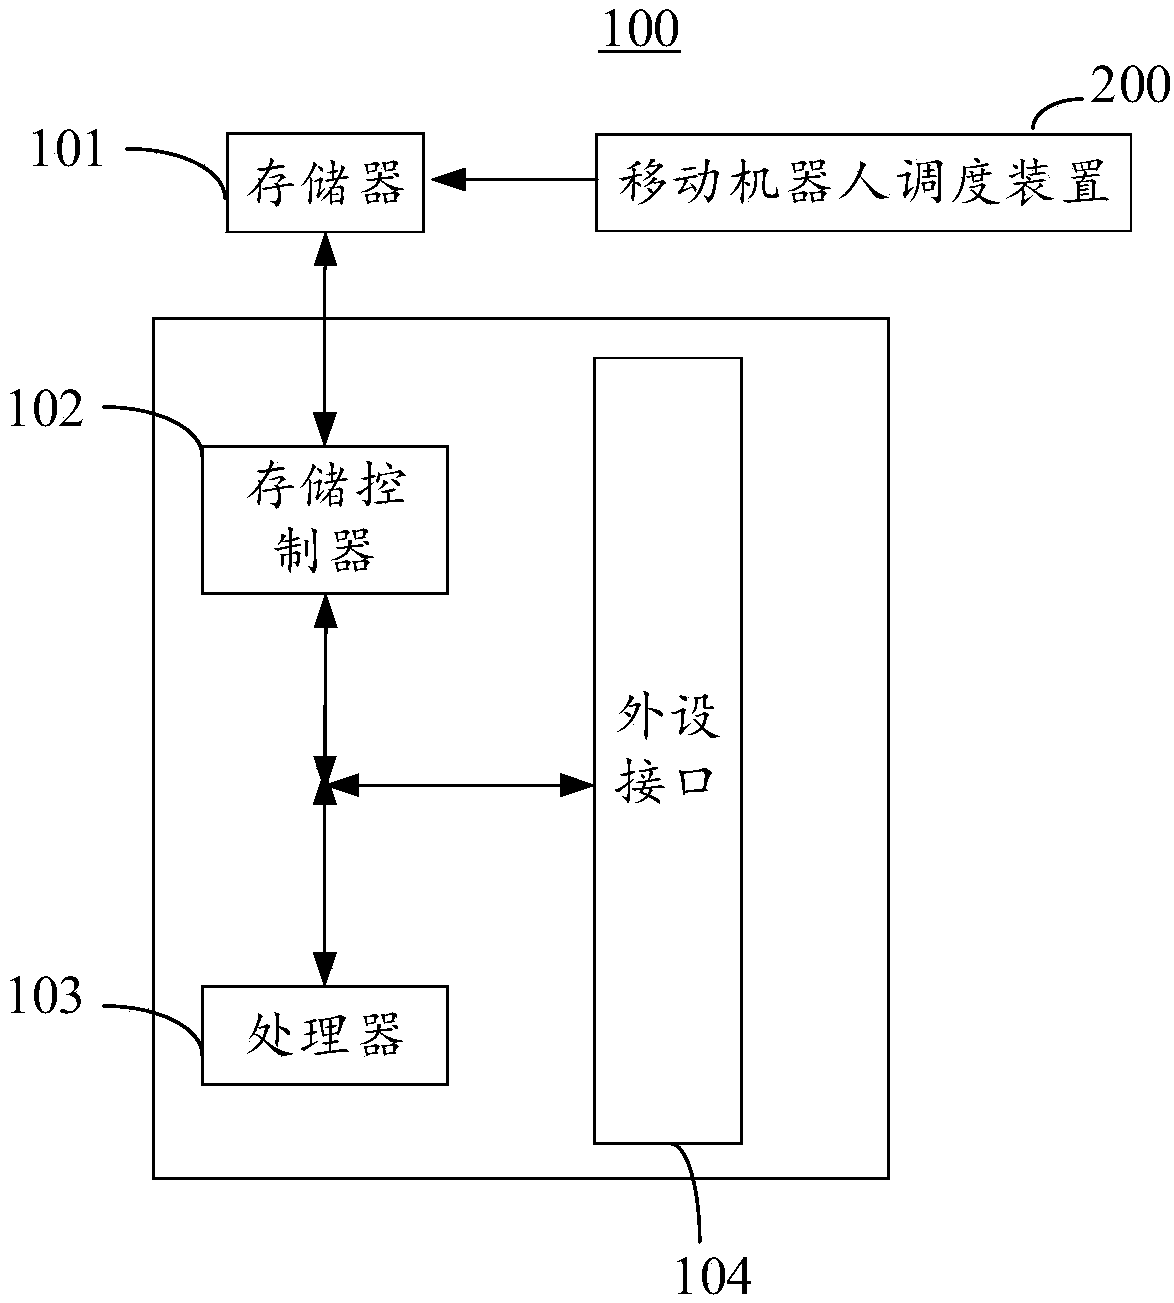 Mobile robot scheduling device and mobile robot scheduling method